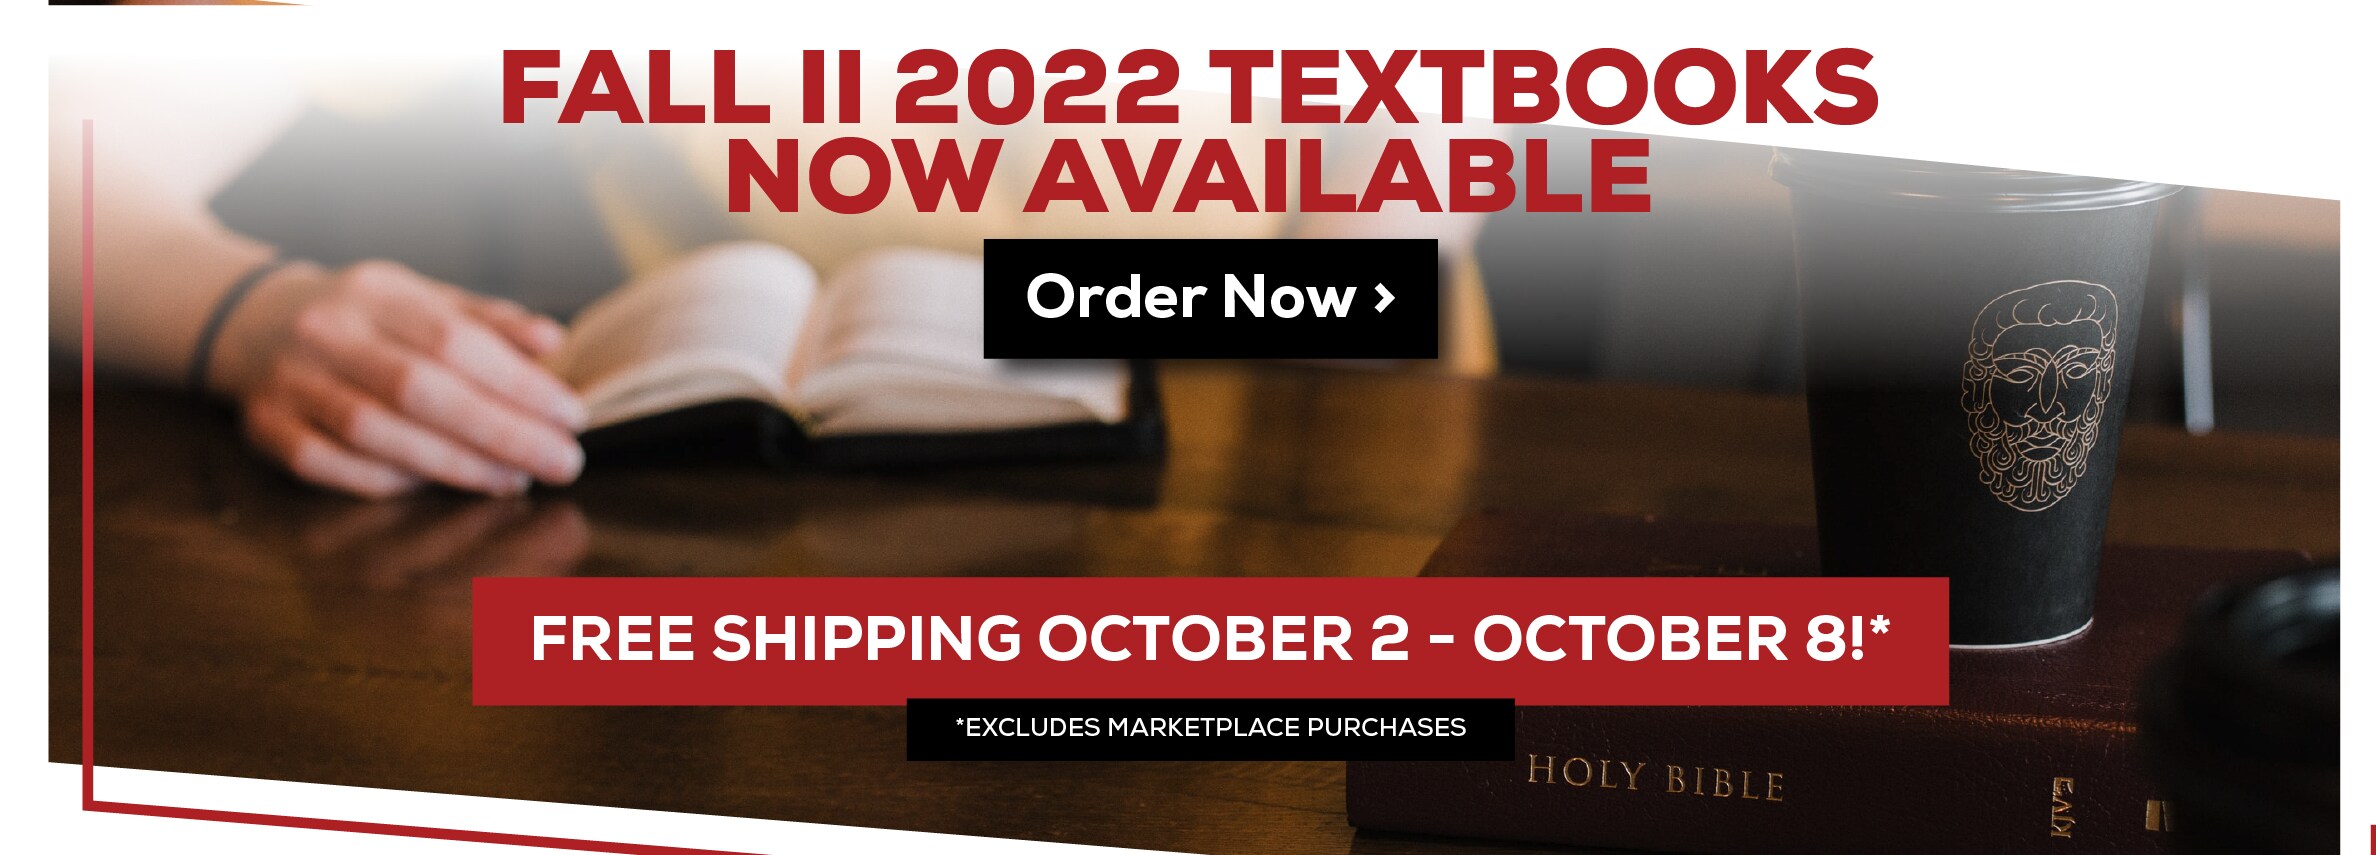 FALL II 2022 TEXTBOOKS NOW AVAILABLE Order Now > FREE SHIPPING OCTOBER 2 - OCTOBER 81* *EXCLUDES MARKETPLACE PURCHASES